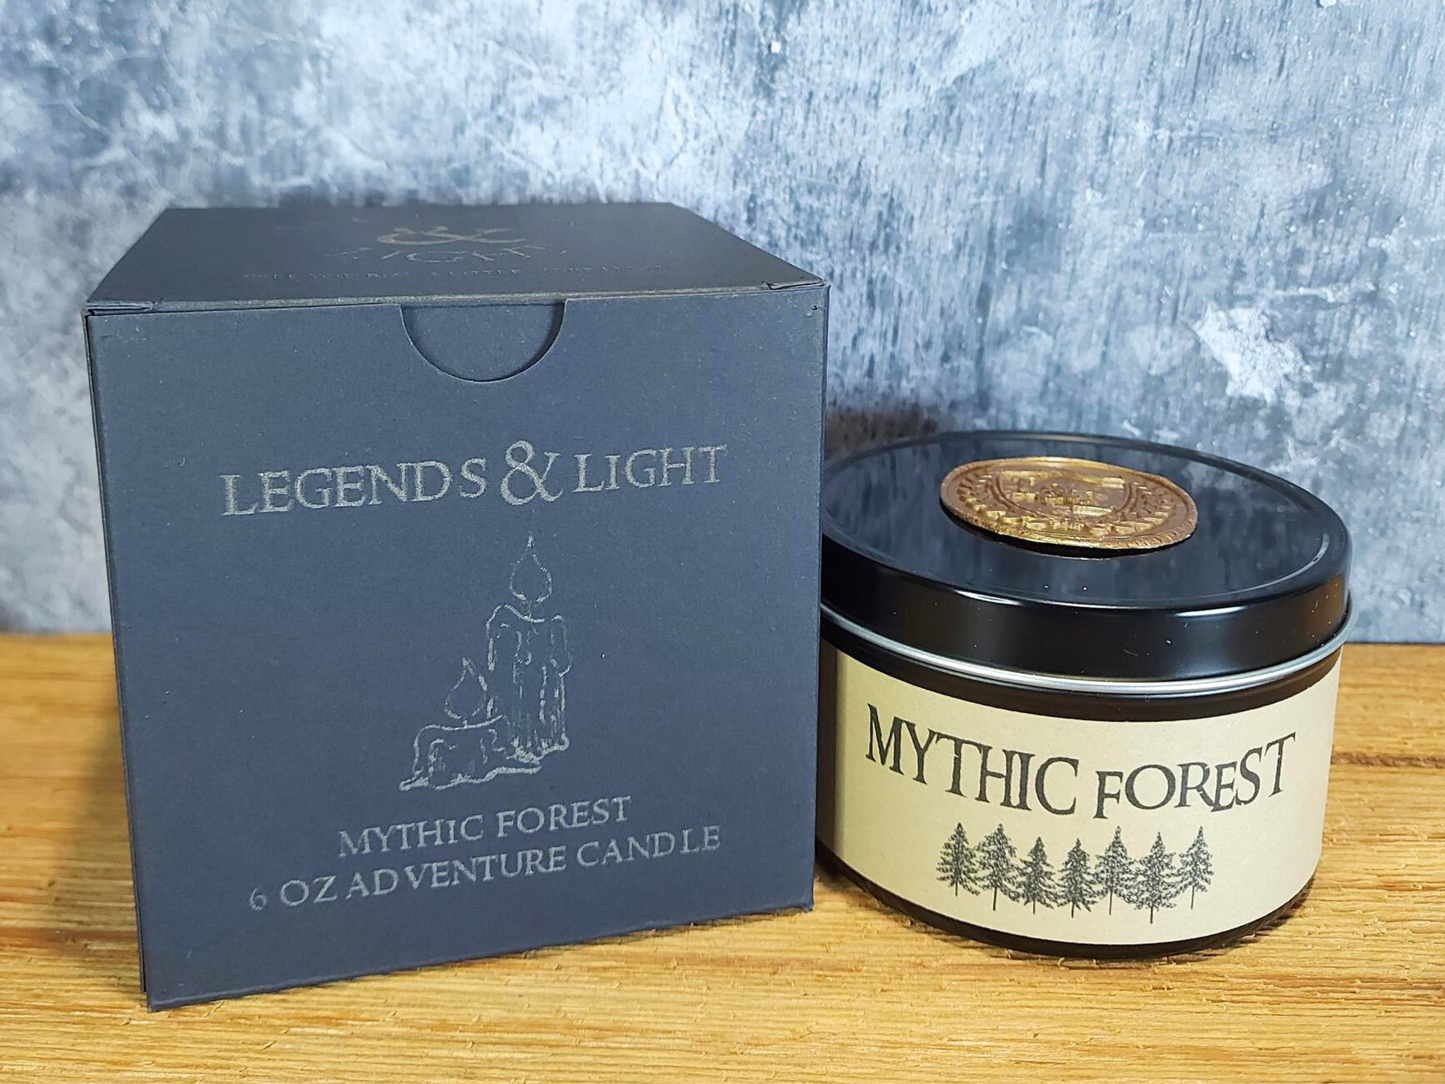 Mythic Forest